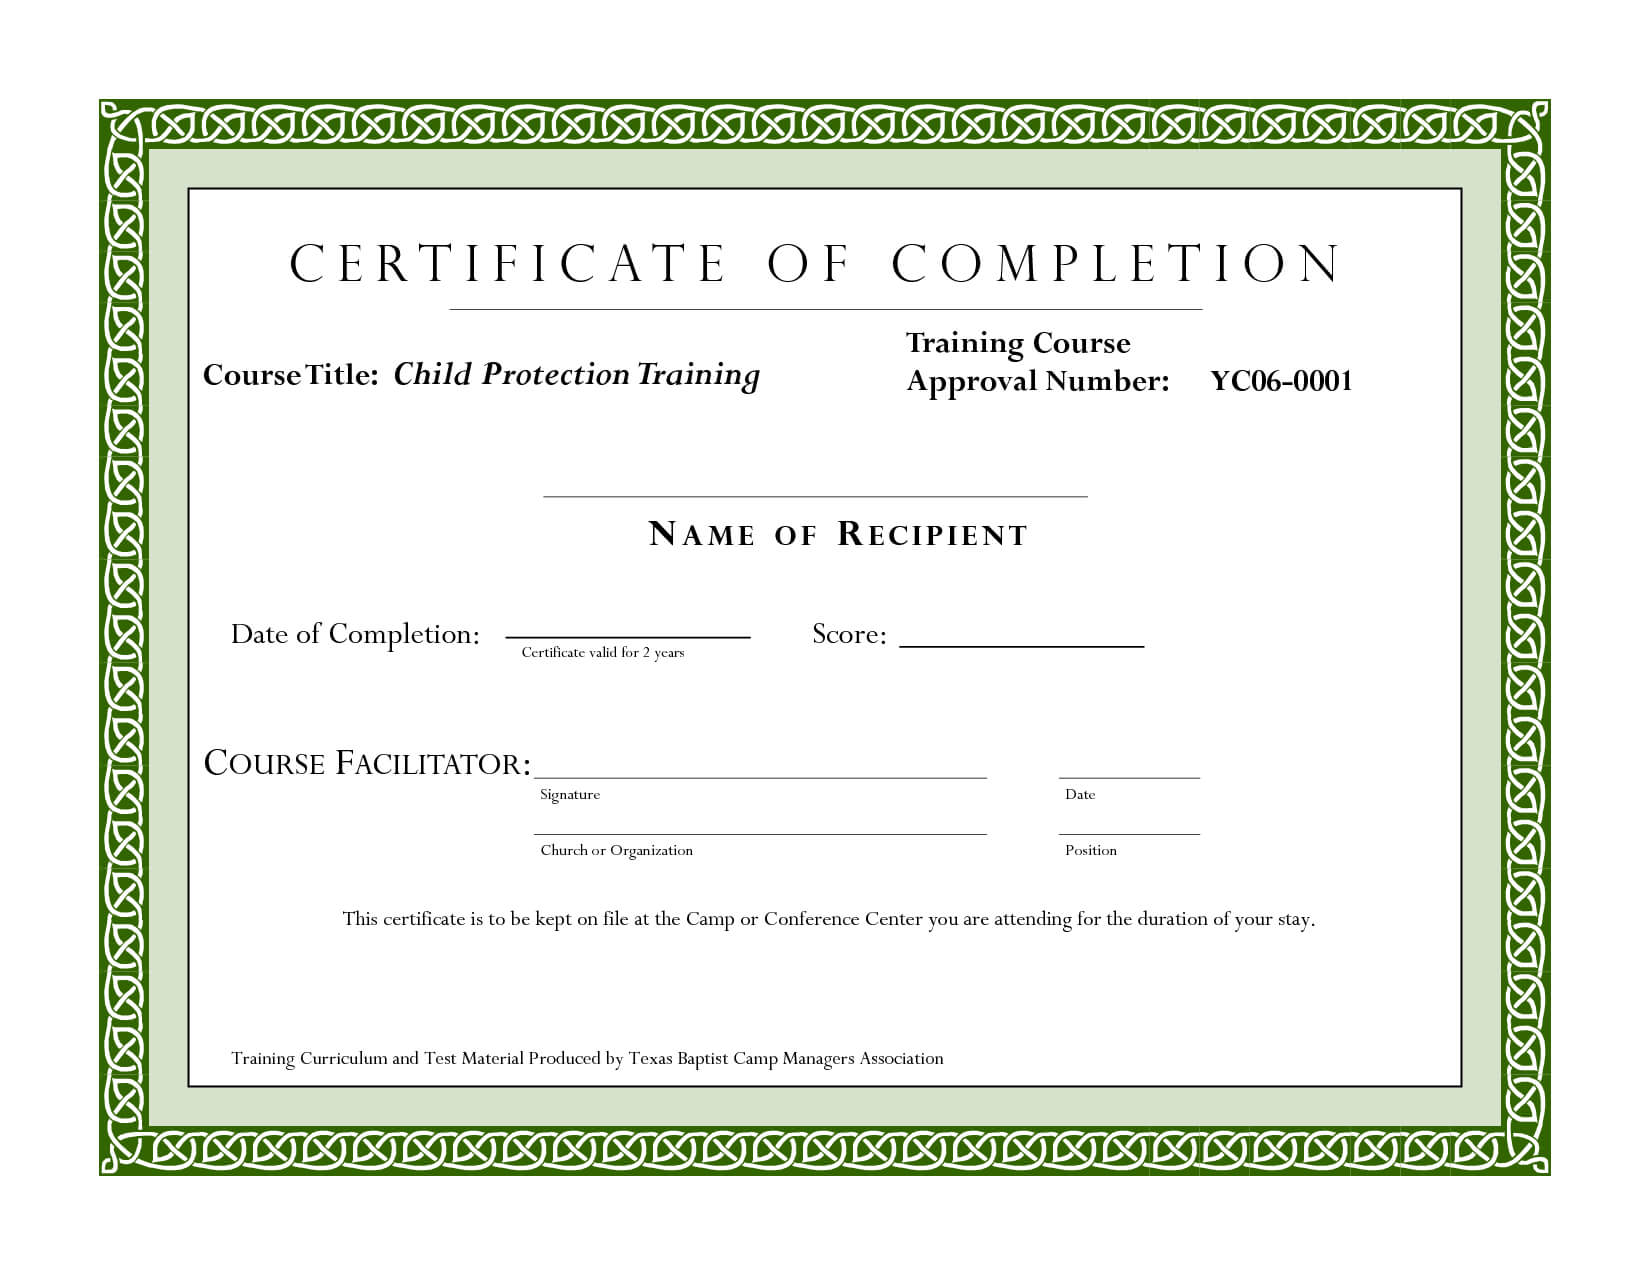 Course Completion Certificate Template | Certificate Of Pertaining To Certification Of Completion Template